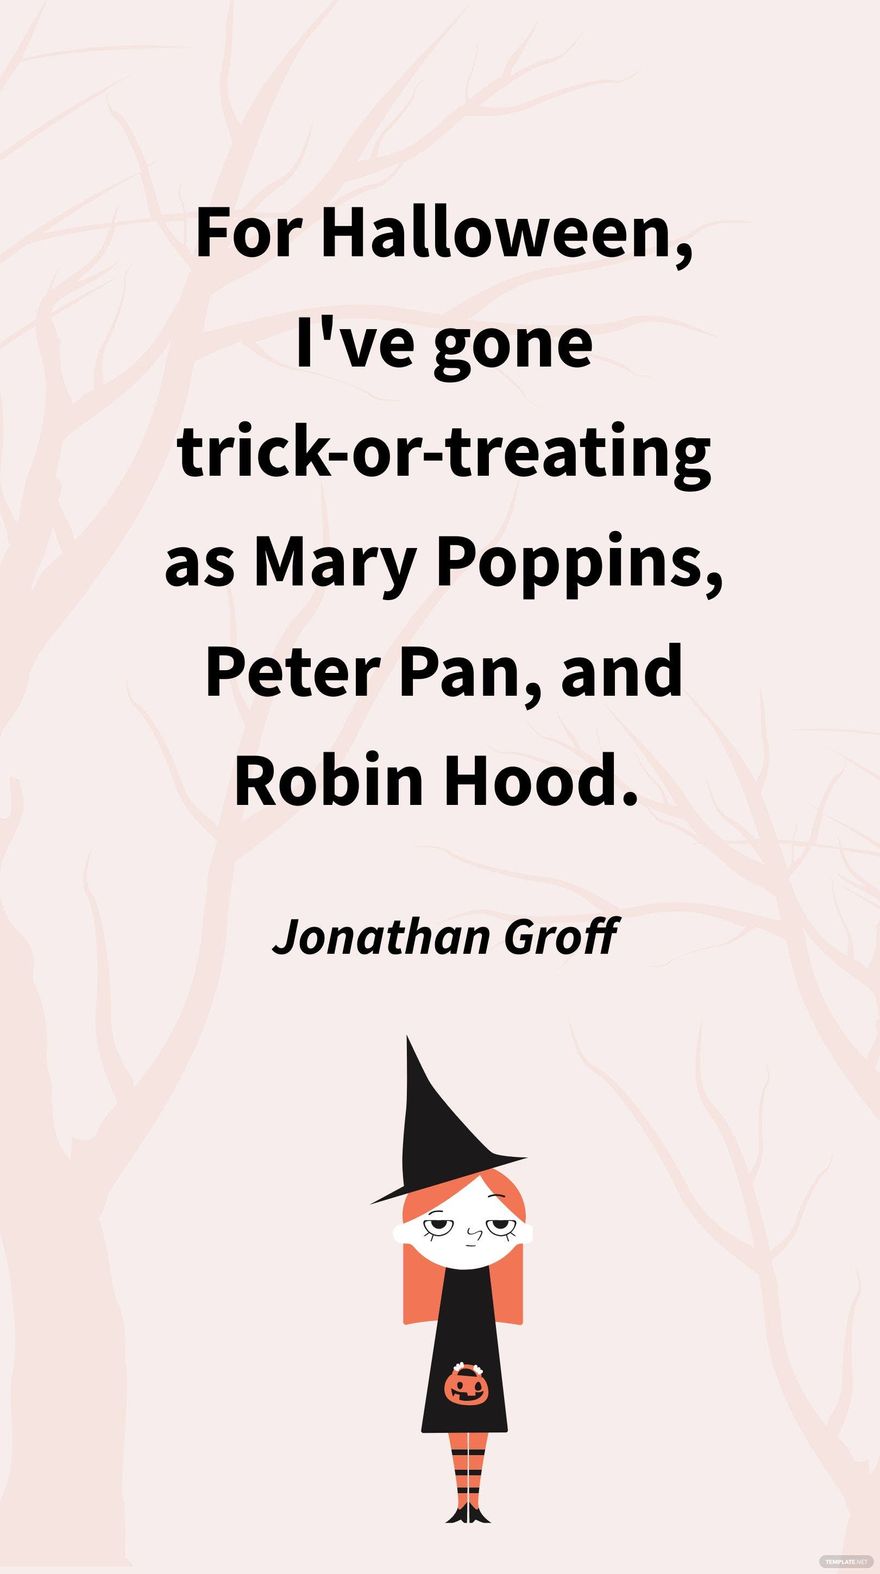 Jonathan Groff - For Halloween, I've gone trick-or-treating as Mary Poppins, Peter Pan, and Robin Hood.